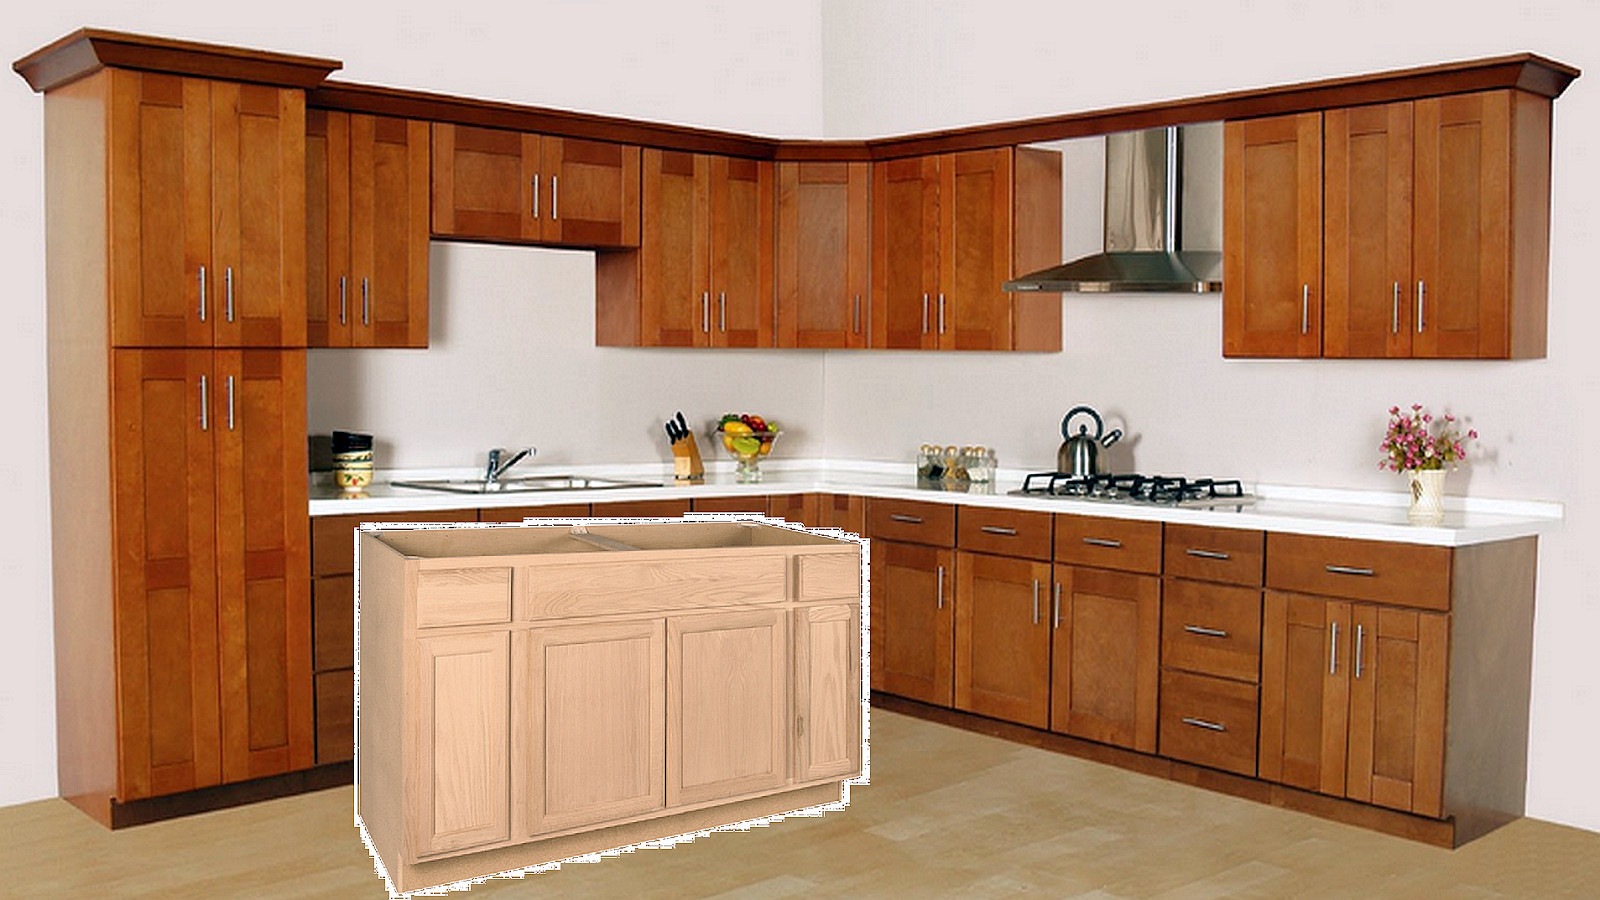 Kitchen Cabinets Finish
 how to finish unfinished kitchen cabinets